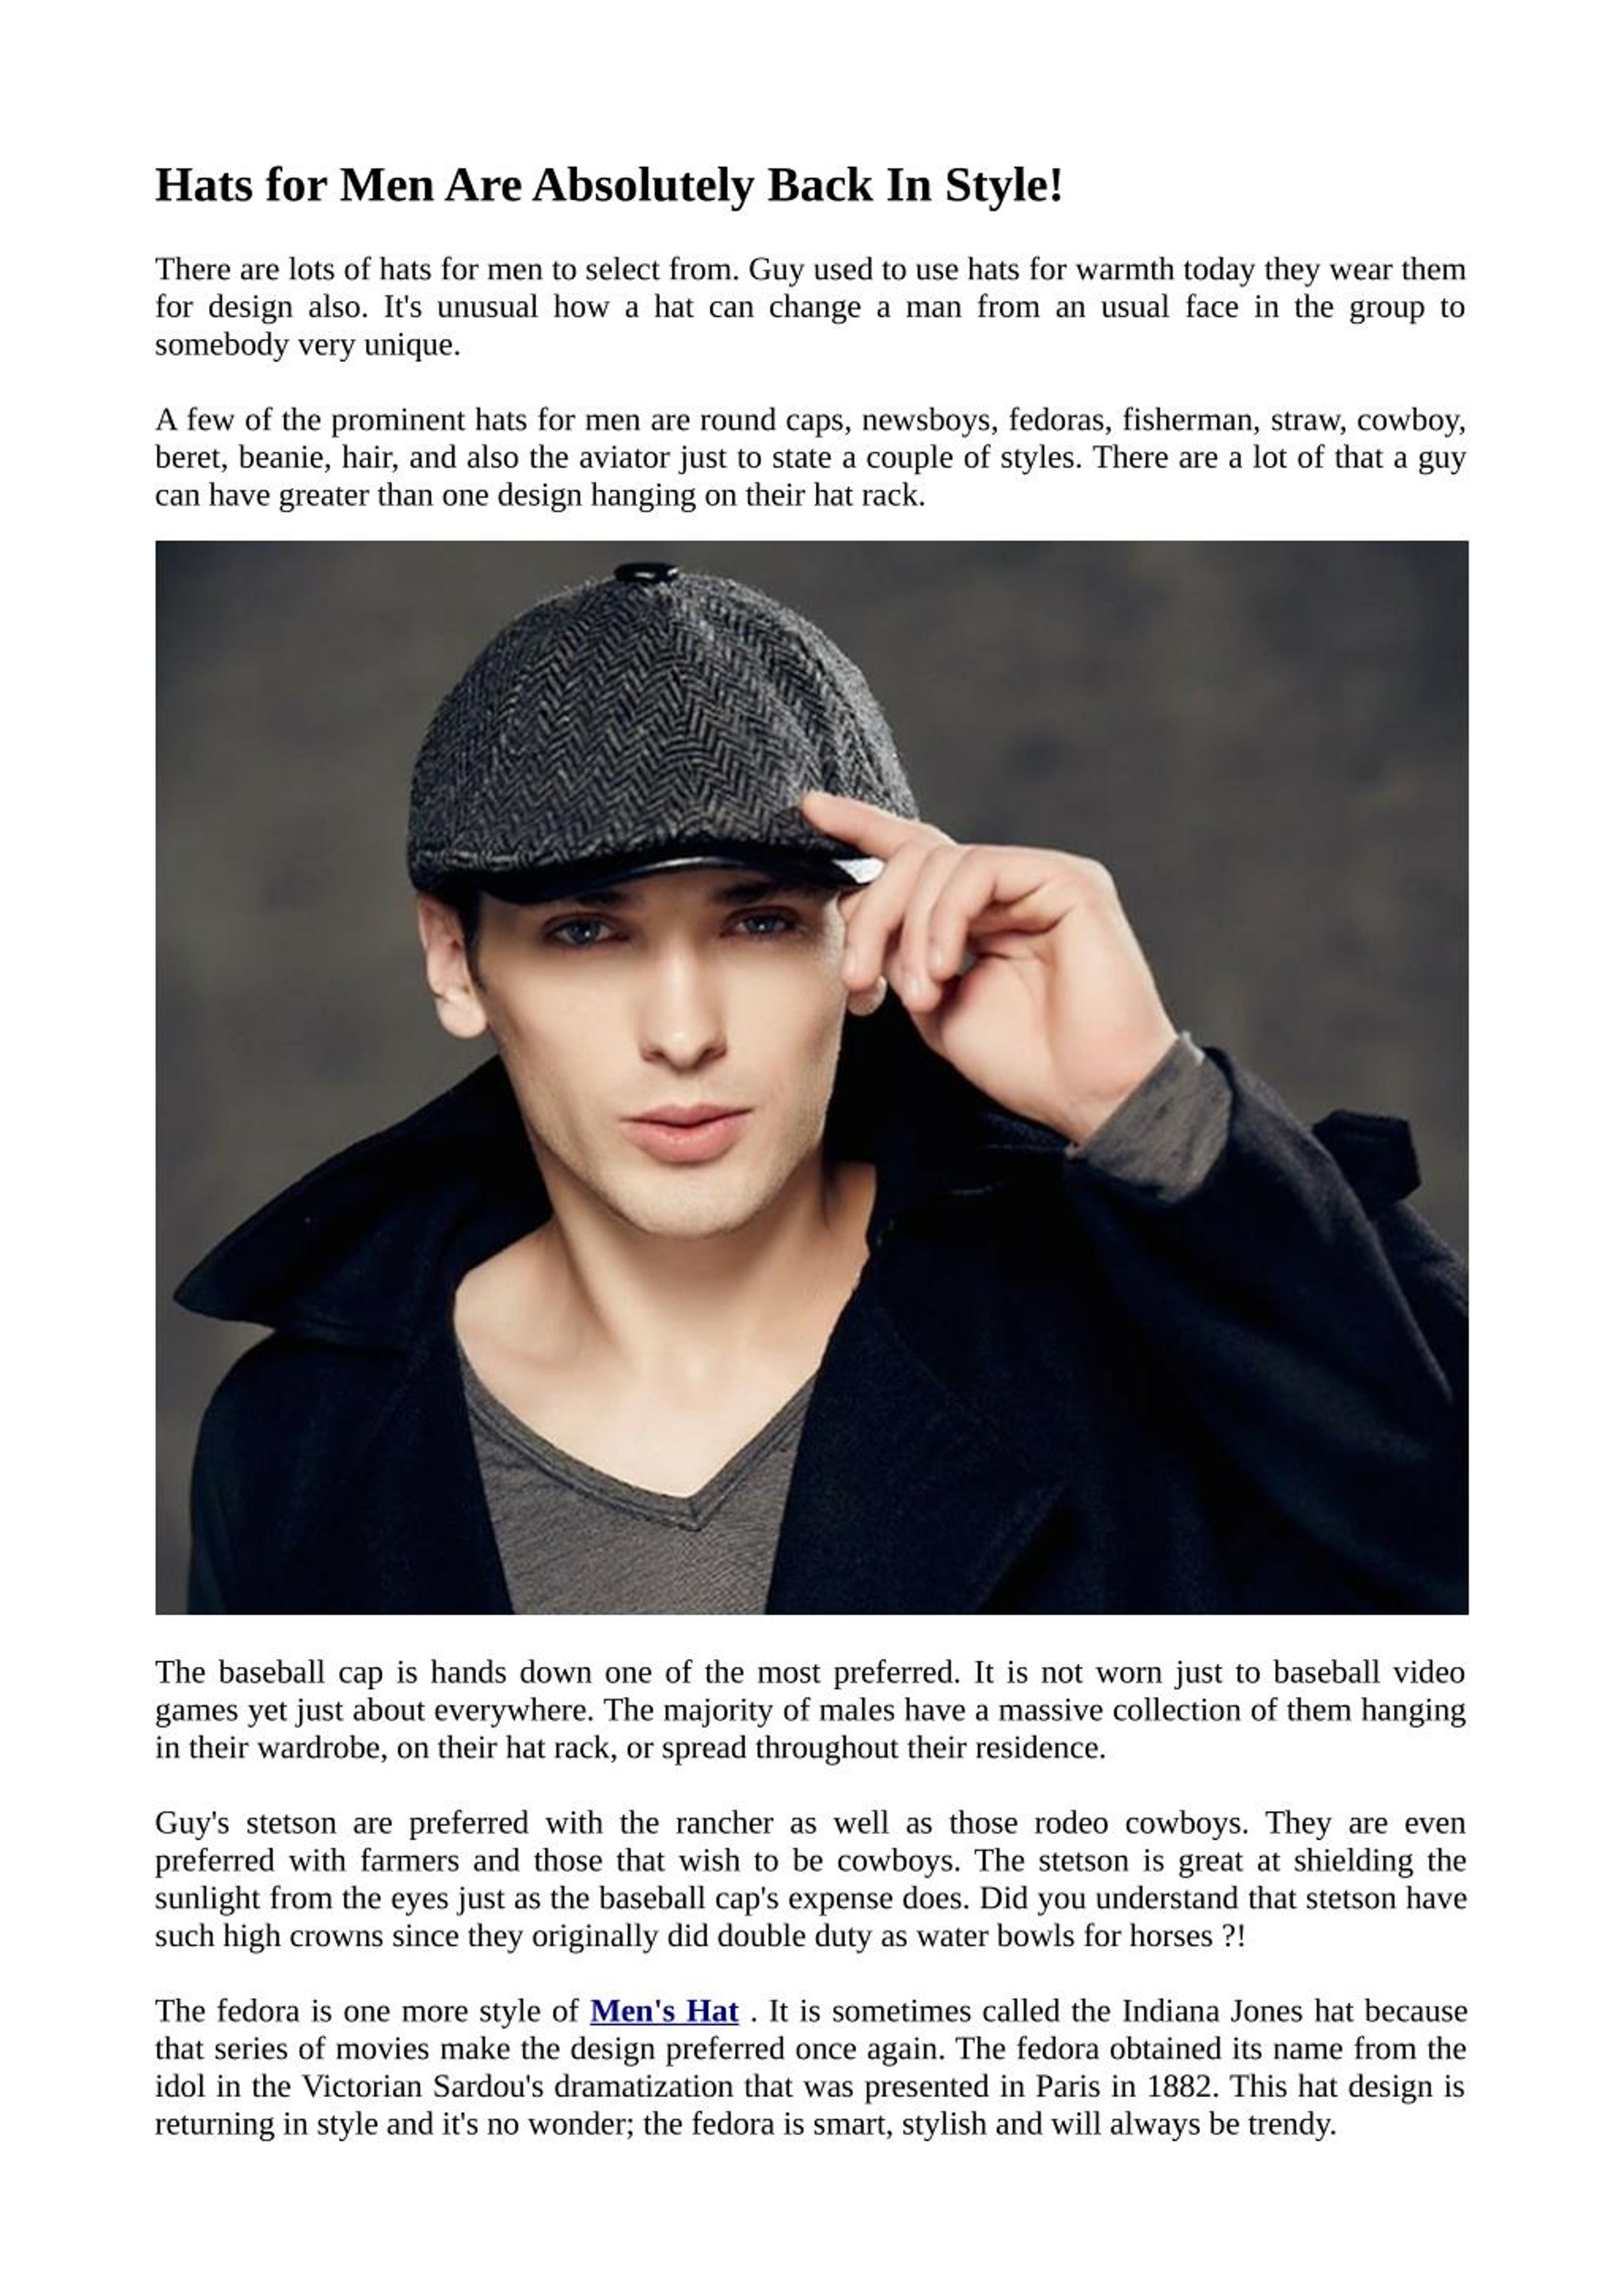 PPT - Hats for Men Are Absolutely Back In Style! PowerPoint Presentation -  ID:7255155